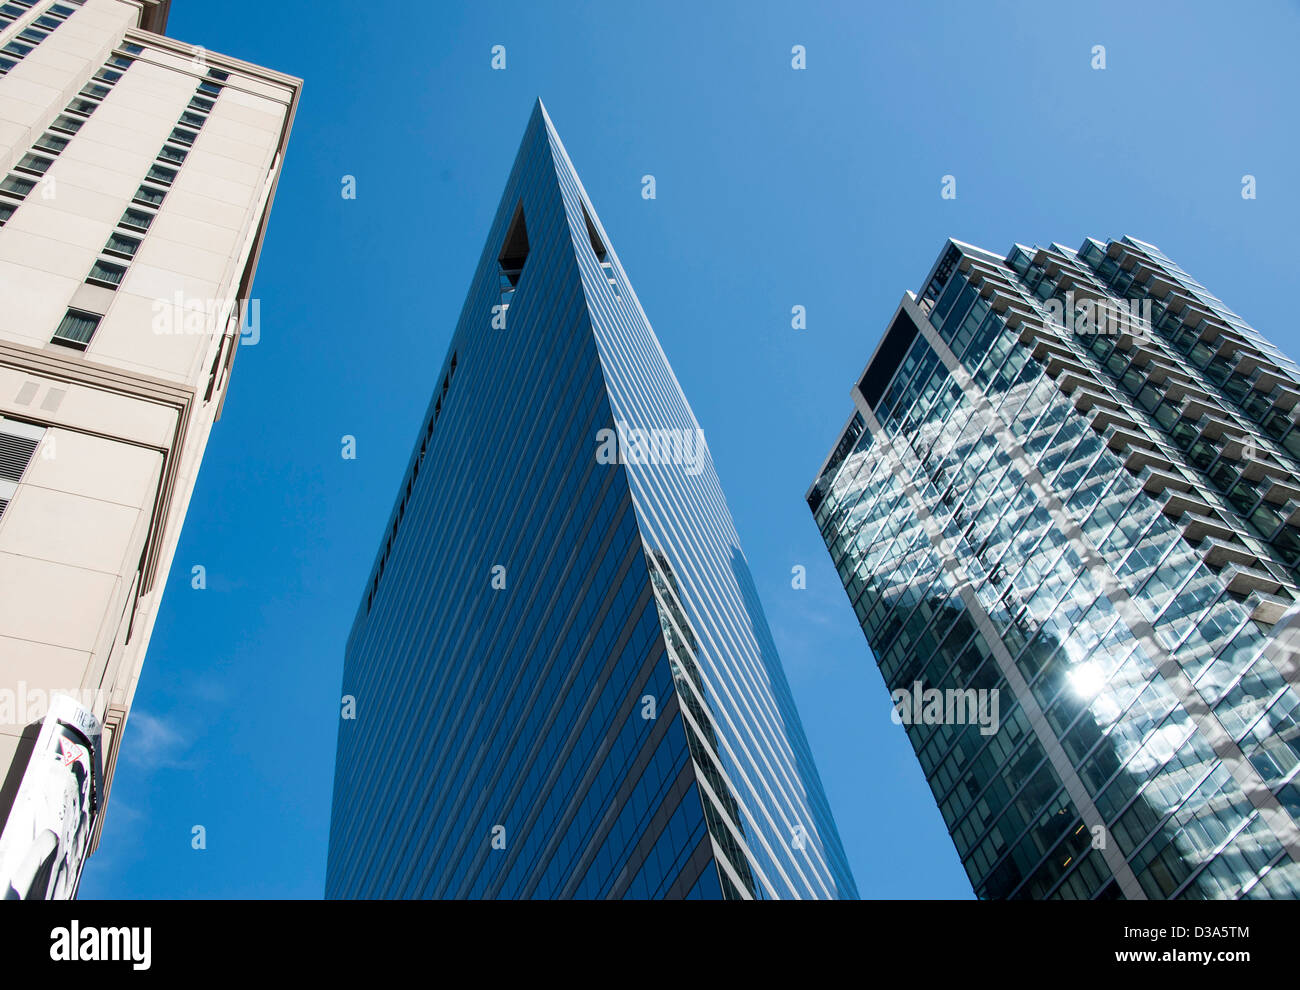 Tall buildings in Chicago Stock Photo